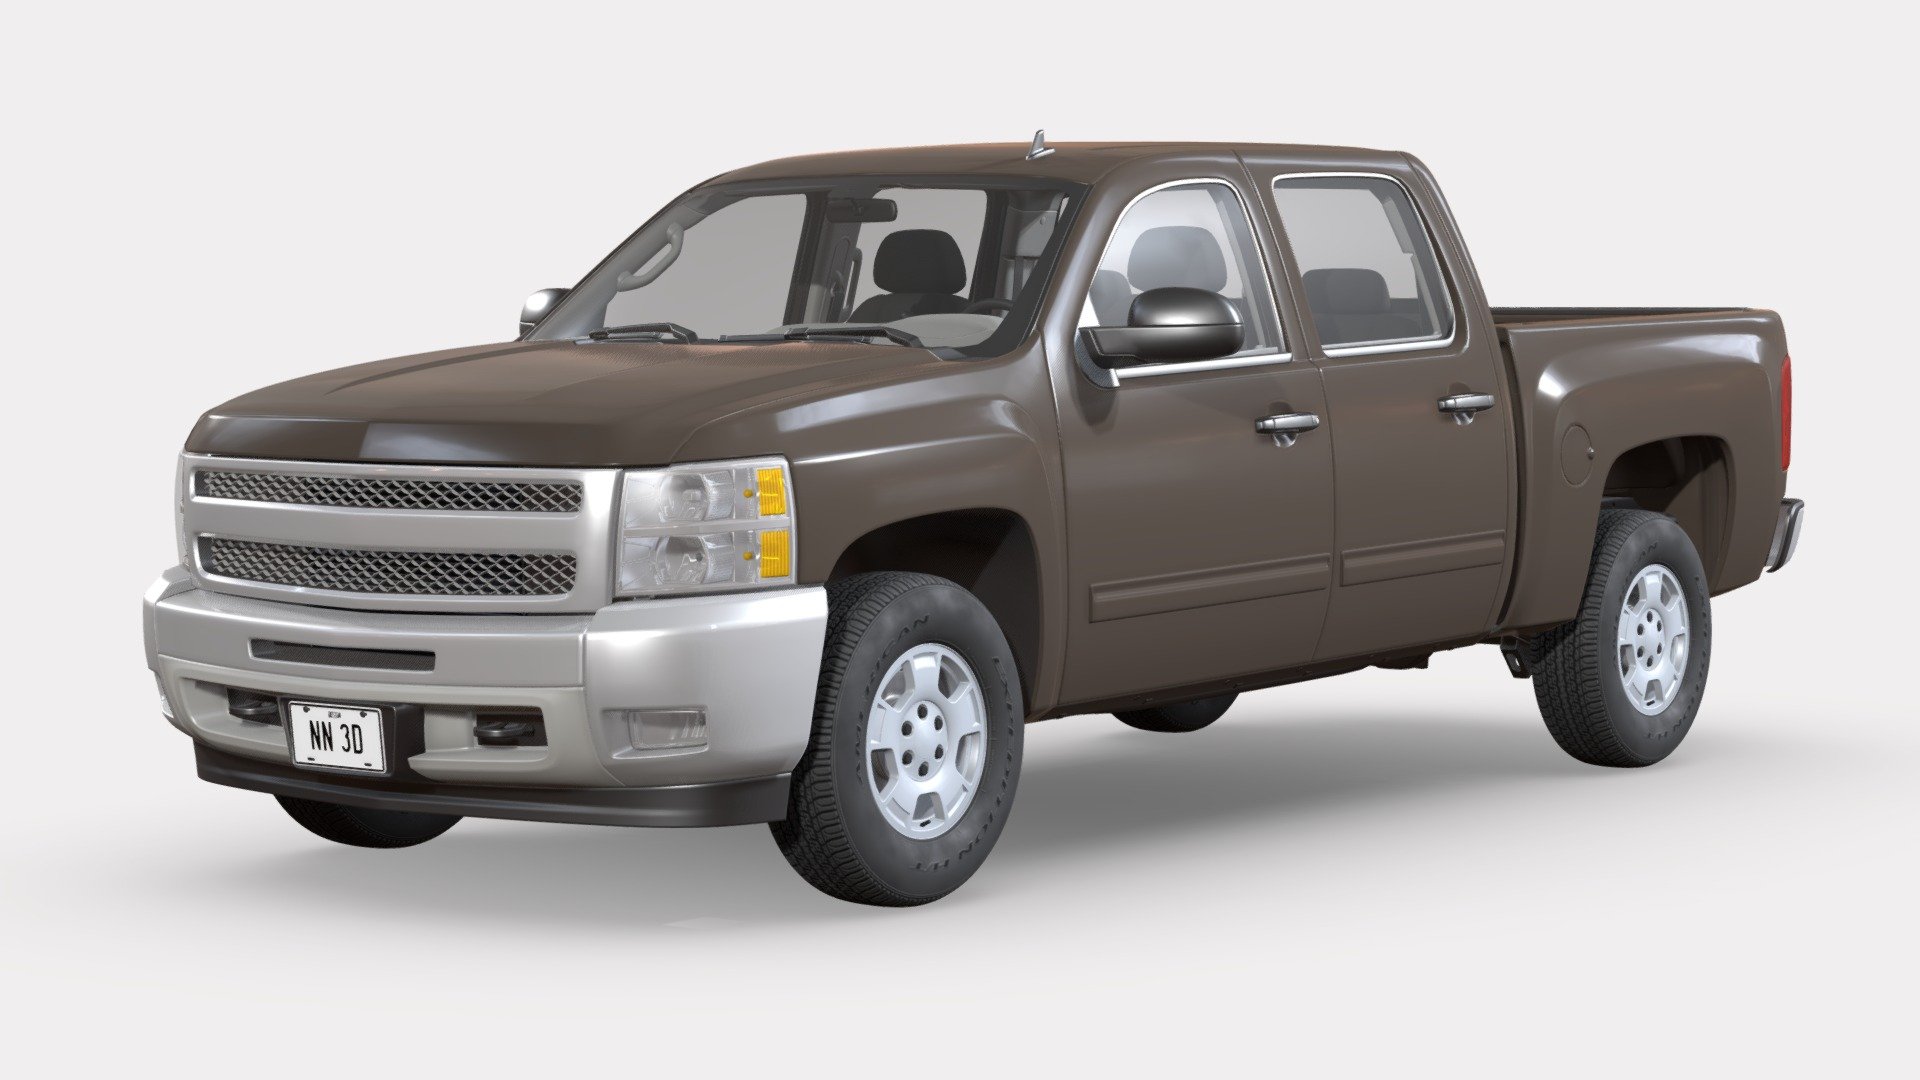 NN 3D store:

3D model of a crew cab pickup truck.

The truck's high detail exterior is great for close up renders, the cabin, chassis and drivetrain have been extensively detailed for close range shots.

The model was created with 3DS Max 2016 using the open subdivision modifier which has been left in the stack to adjust the level of detail.

There are also included HI and LO poly versions in Blender 2.9 format with textures.

Exchange files included: FBX, OBJ and 3DS, all with HI and LO subdivision versions.

The model has 178.000 polygons with subdivision level at 0 and 712.000 at level 1.

Renderer: V Ray and Cycles.

The model is fully textured and UV mapped with diffuse, bump, roughness and specular maps.

All materials and textures are included and mapped in all files, settings might have to be adjusted depending on the software you are using.

Textures are in JPG format with 4096x4096, 2048x2048, 1024x1024 and 512x512 resolution 3d model